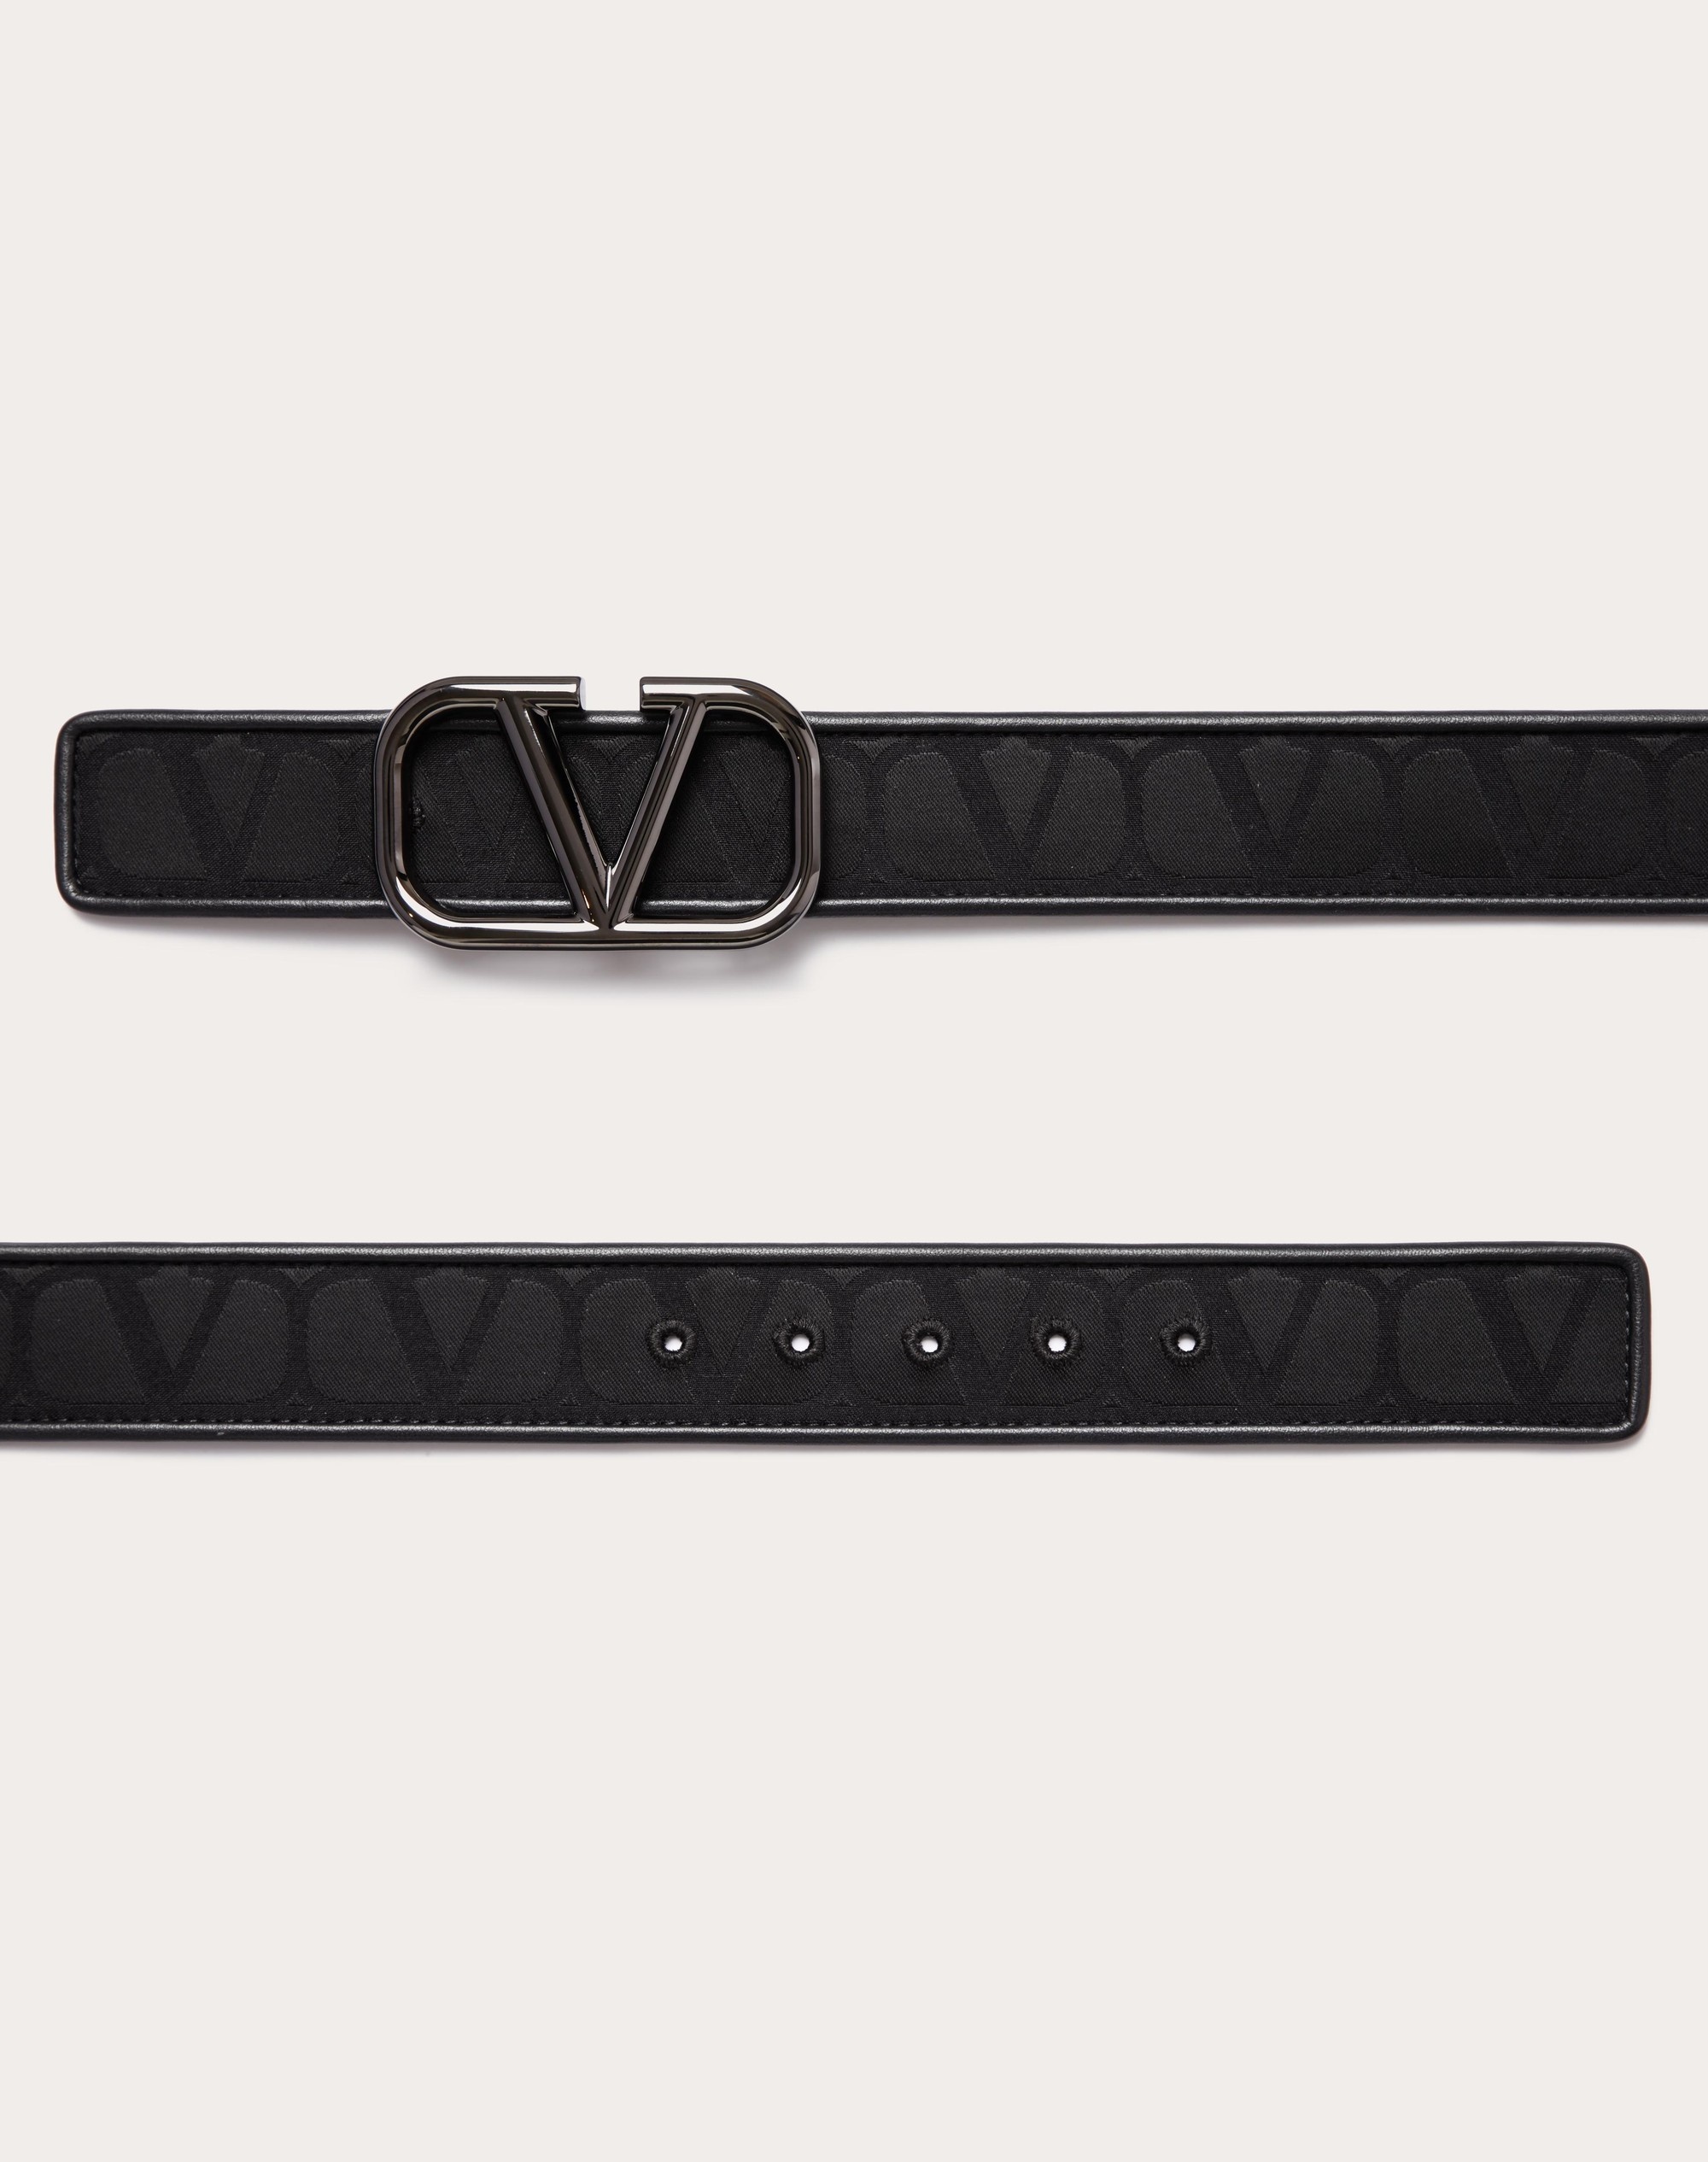 TOILE ICONOGRAPHE BELT IN TECHNICAL FABRIC WITH LEATHER DETAILS - 3